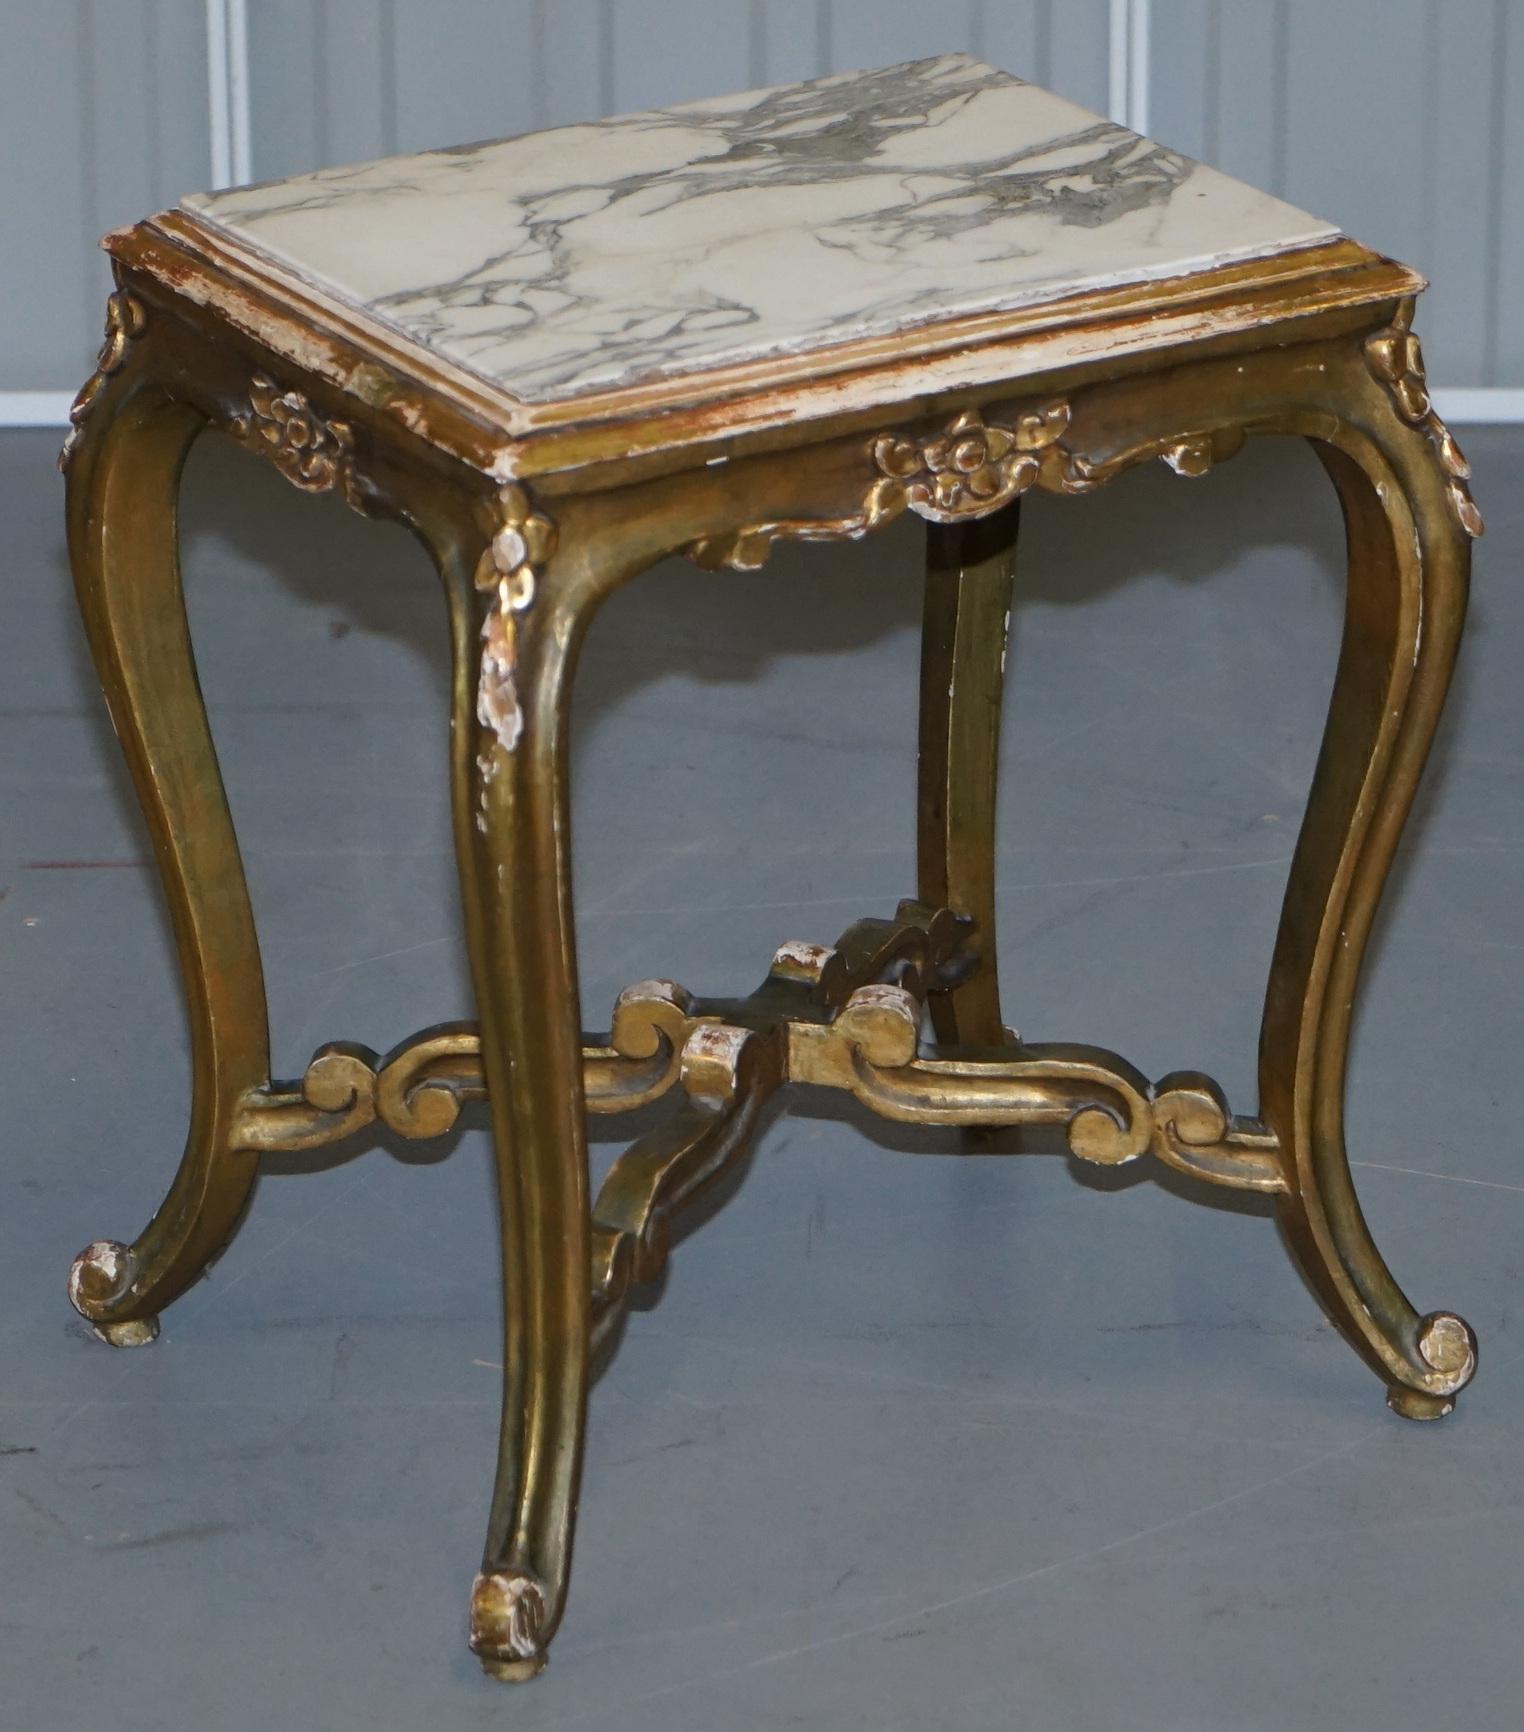 Pair of French circa 1860 Napoleon III Gold Giltwood Marble Topped Side Tables For Sale 7